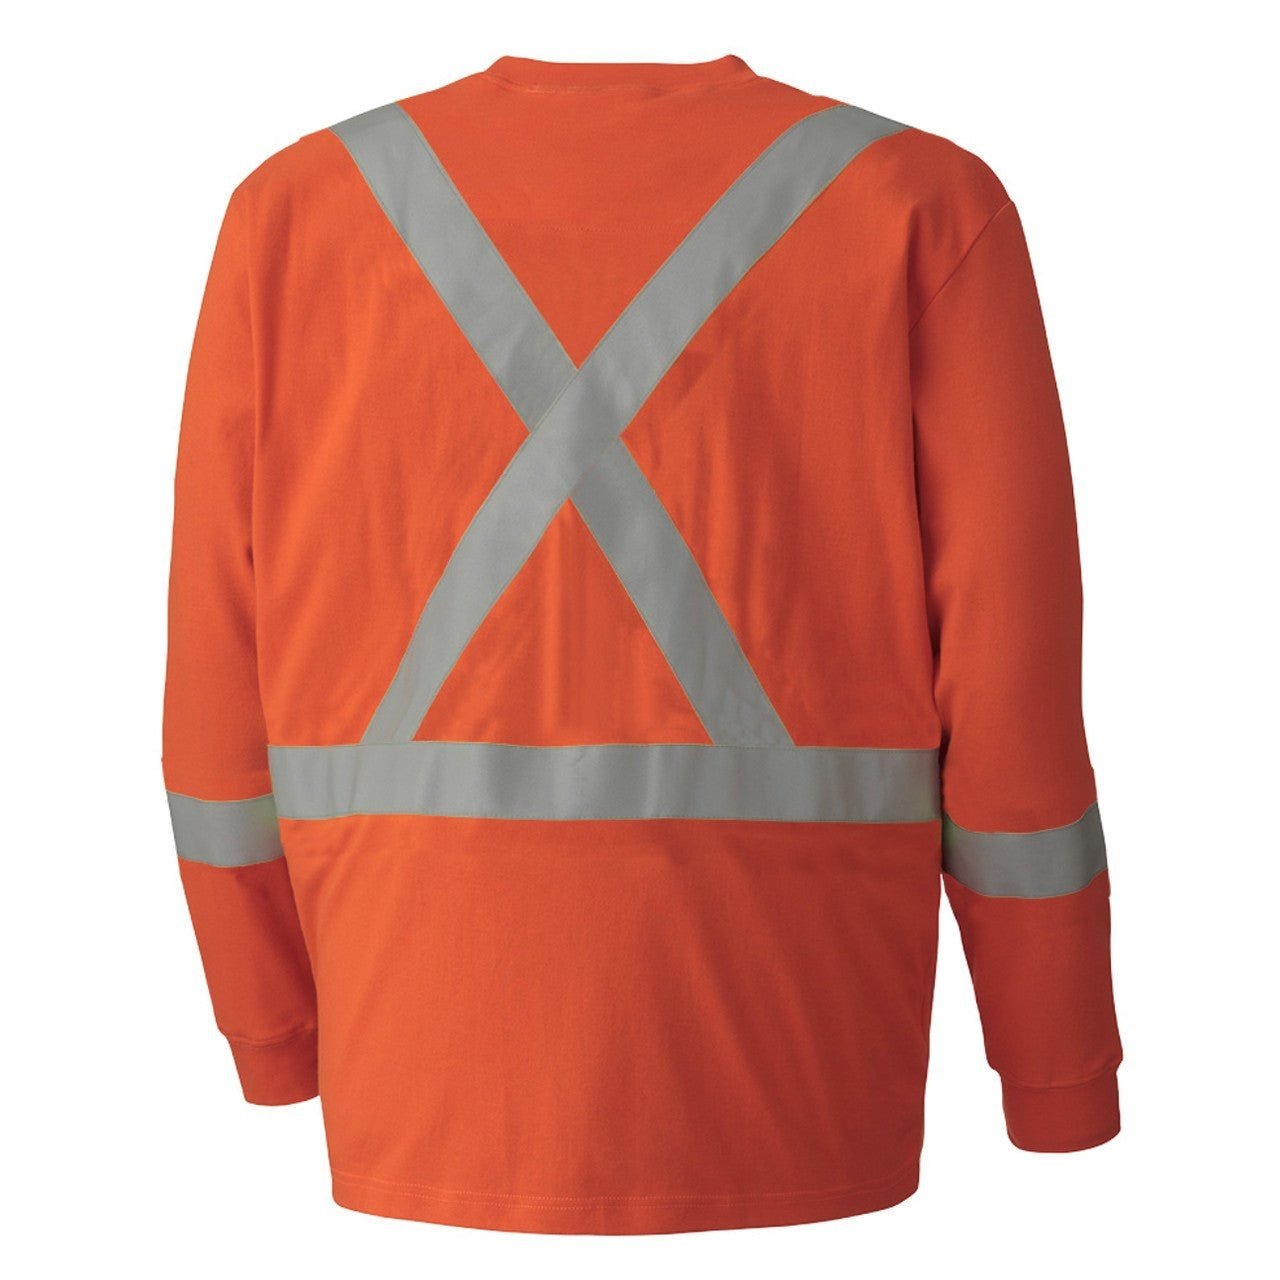 Pioneer 339SFA Flame Resistant/ARC Rated Long Sleeve Safety Shirt- Orange - Pioneer Safety Wear